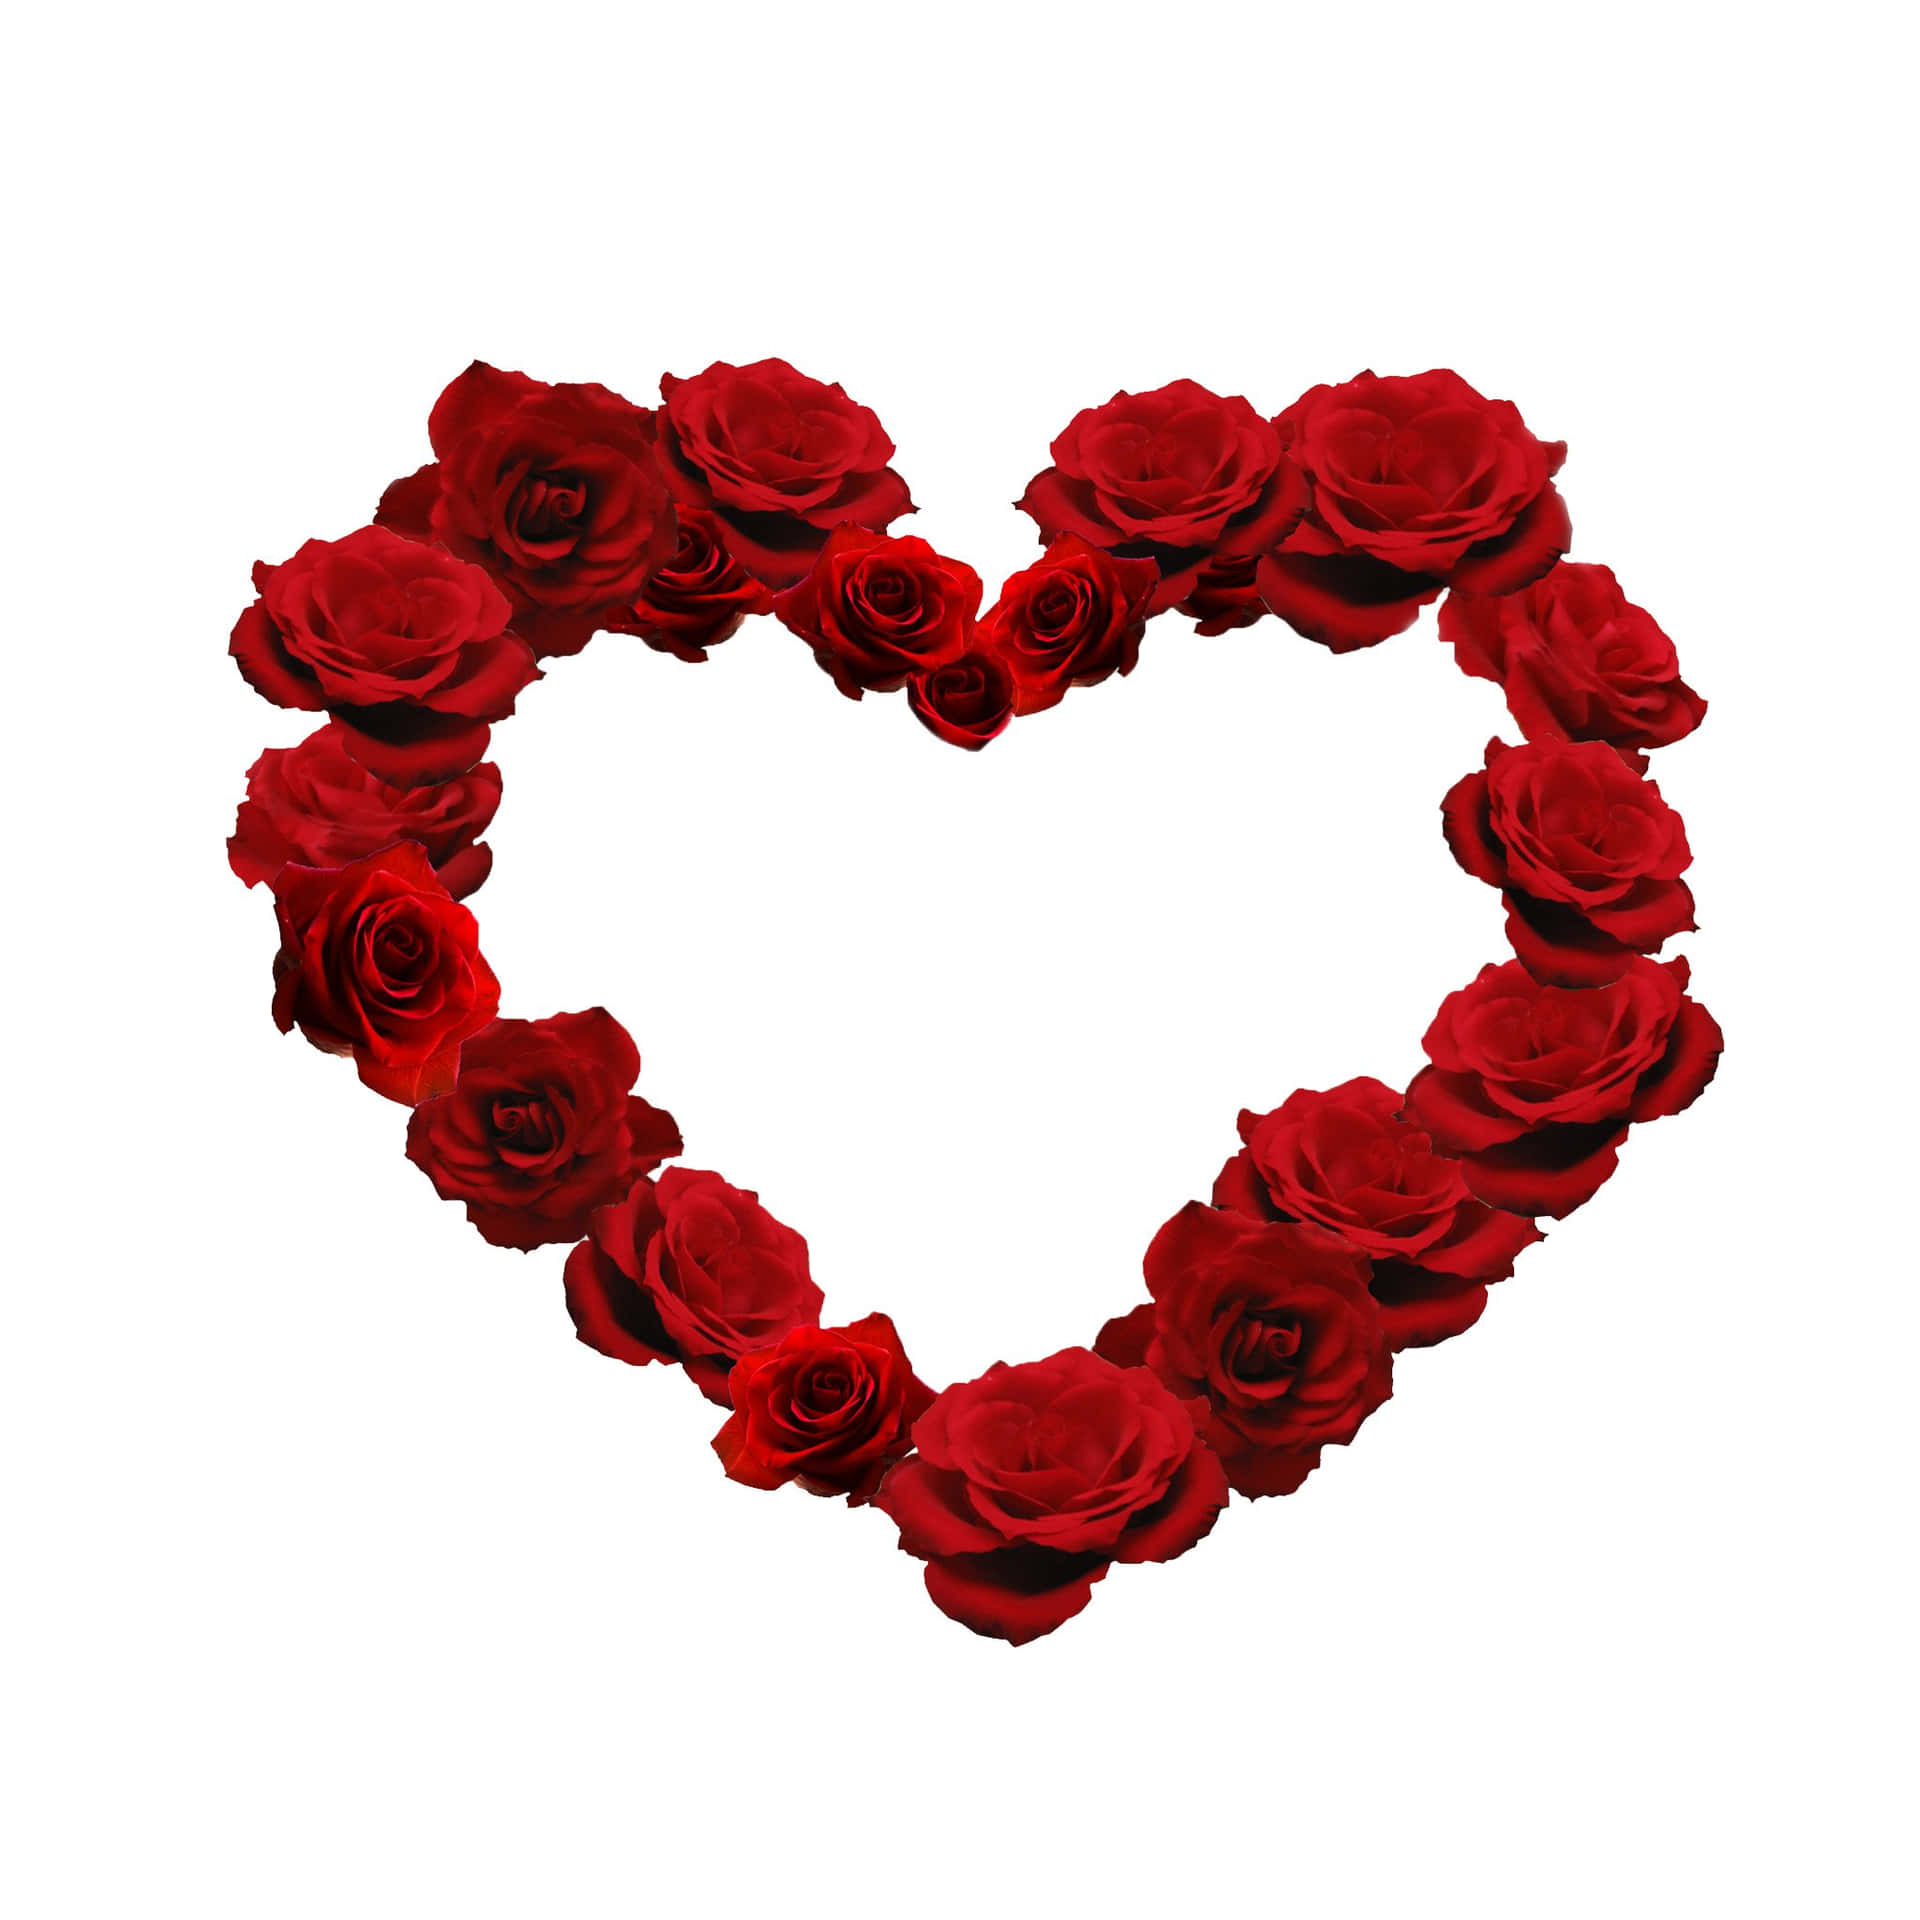 Rose Heart - A Symbol of Love and Romance Wallpaper